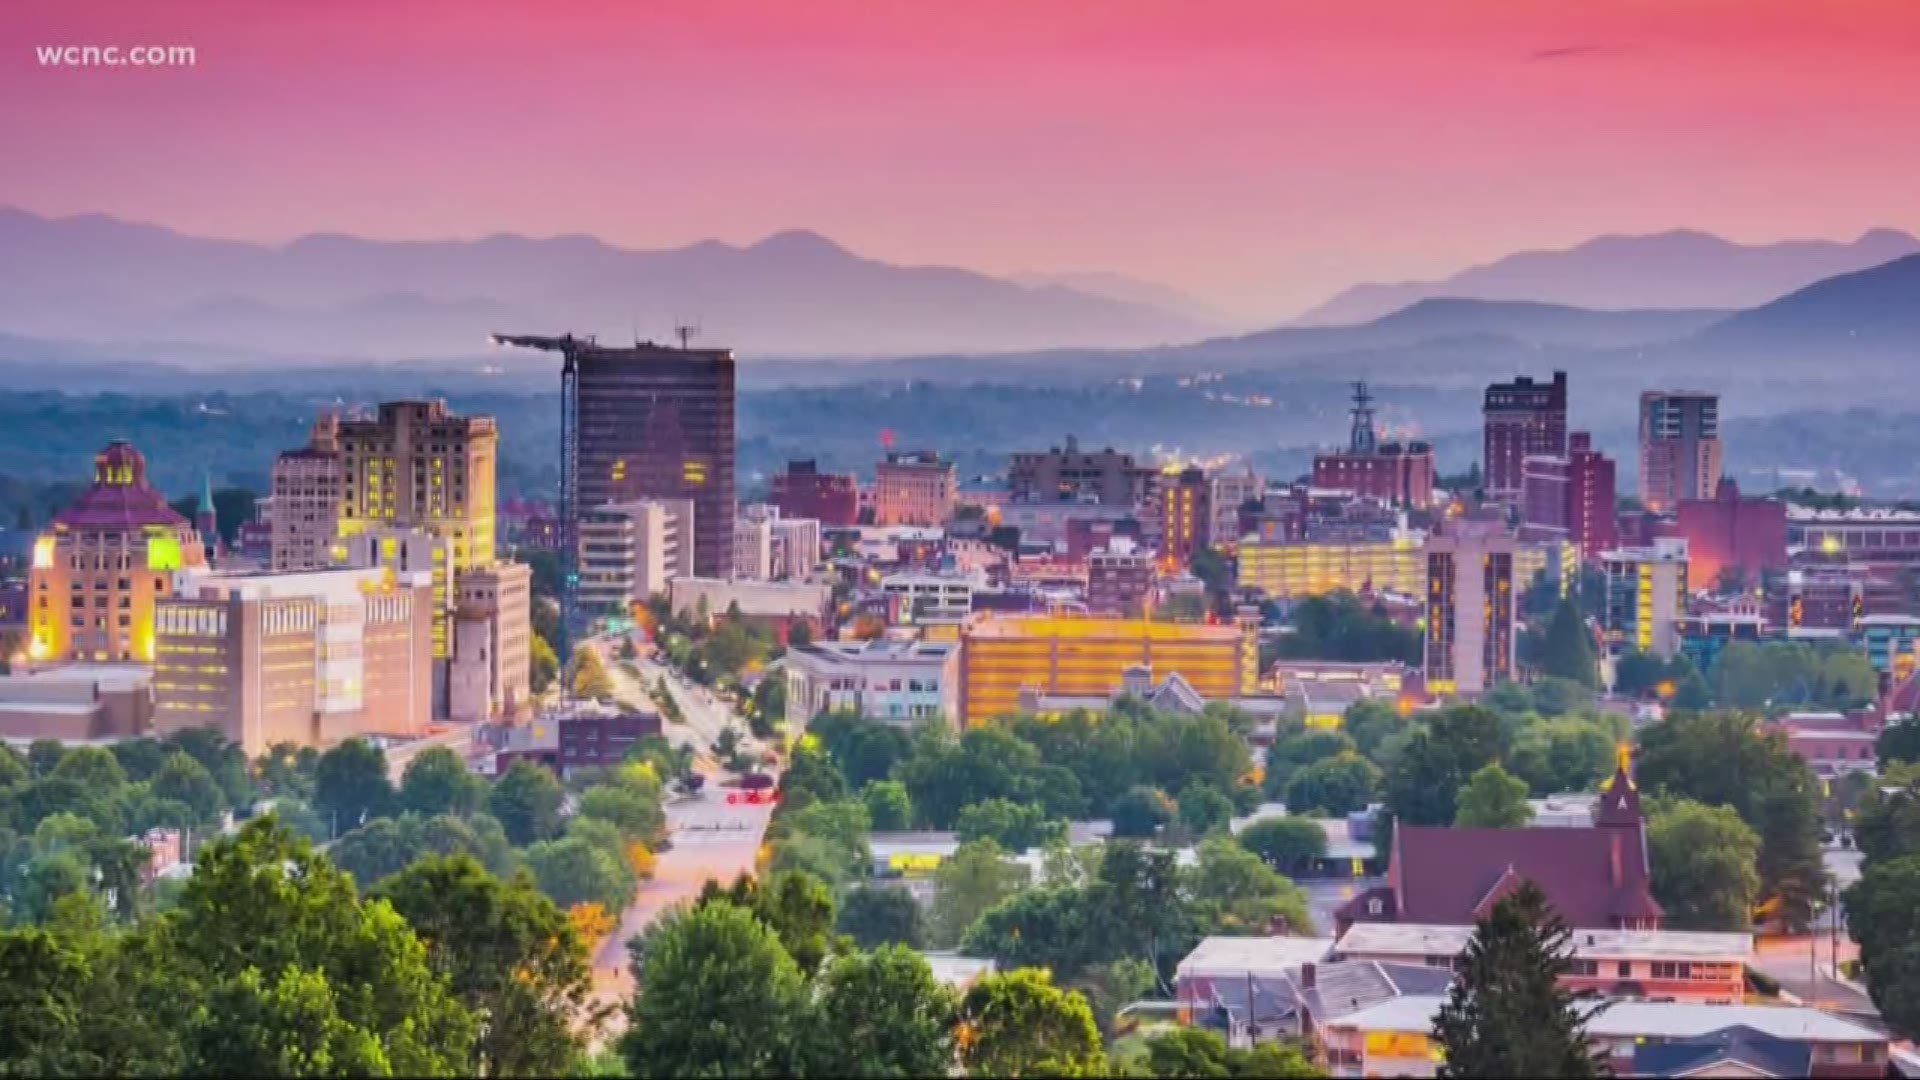 If you call yourself a foodie, it might be time for a road trip to Asheville.